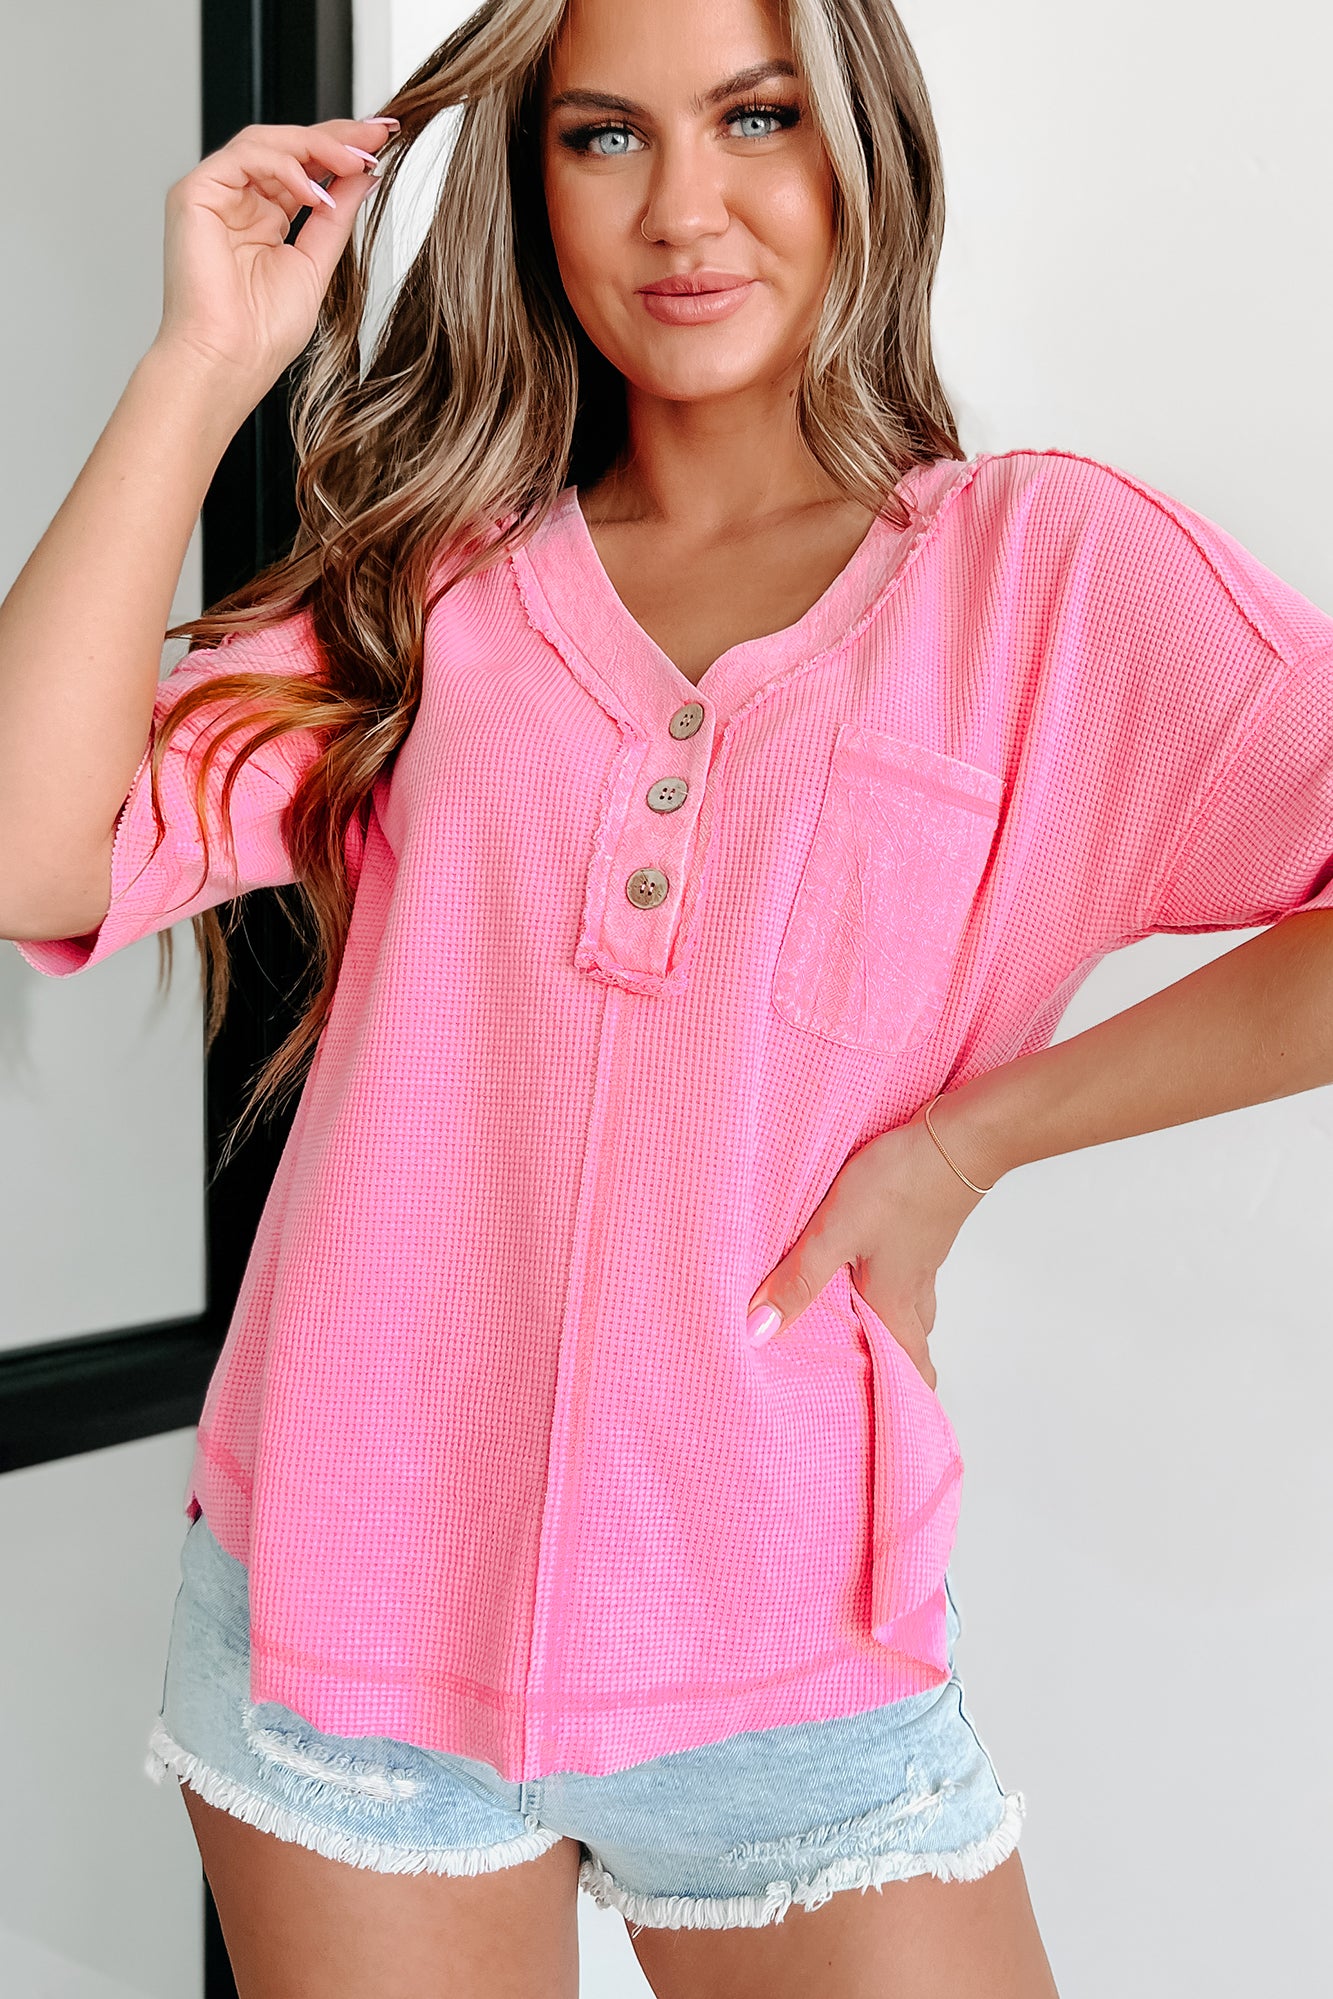 I've Got Places To Be Short Sleeve Thermal Knit Top (Pink) - NanaMacs